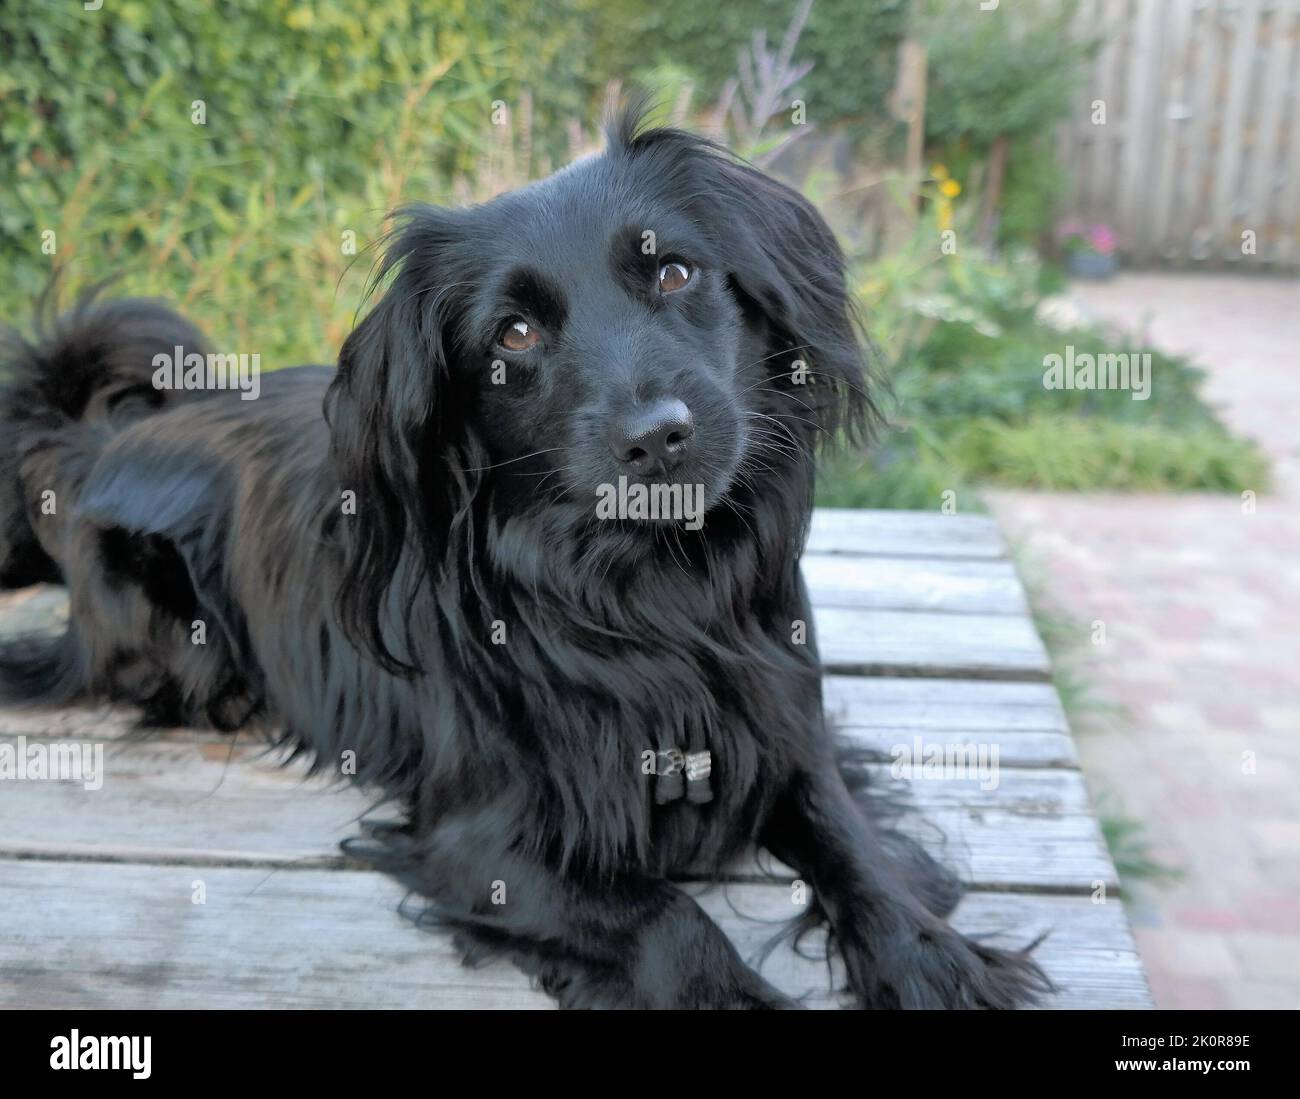 Small black dog, a Markiesje, with a furry coat and brown eyes, lying on a wooden table in the garden. Natural green background and text space. Stock Photo